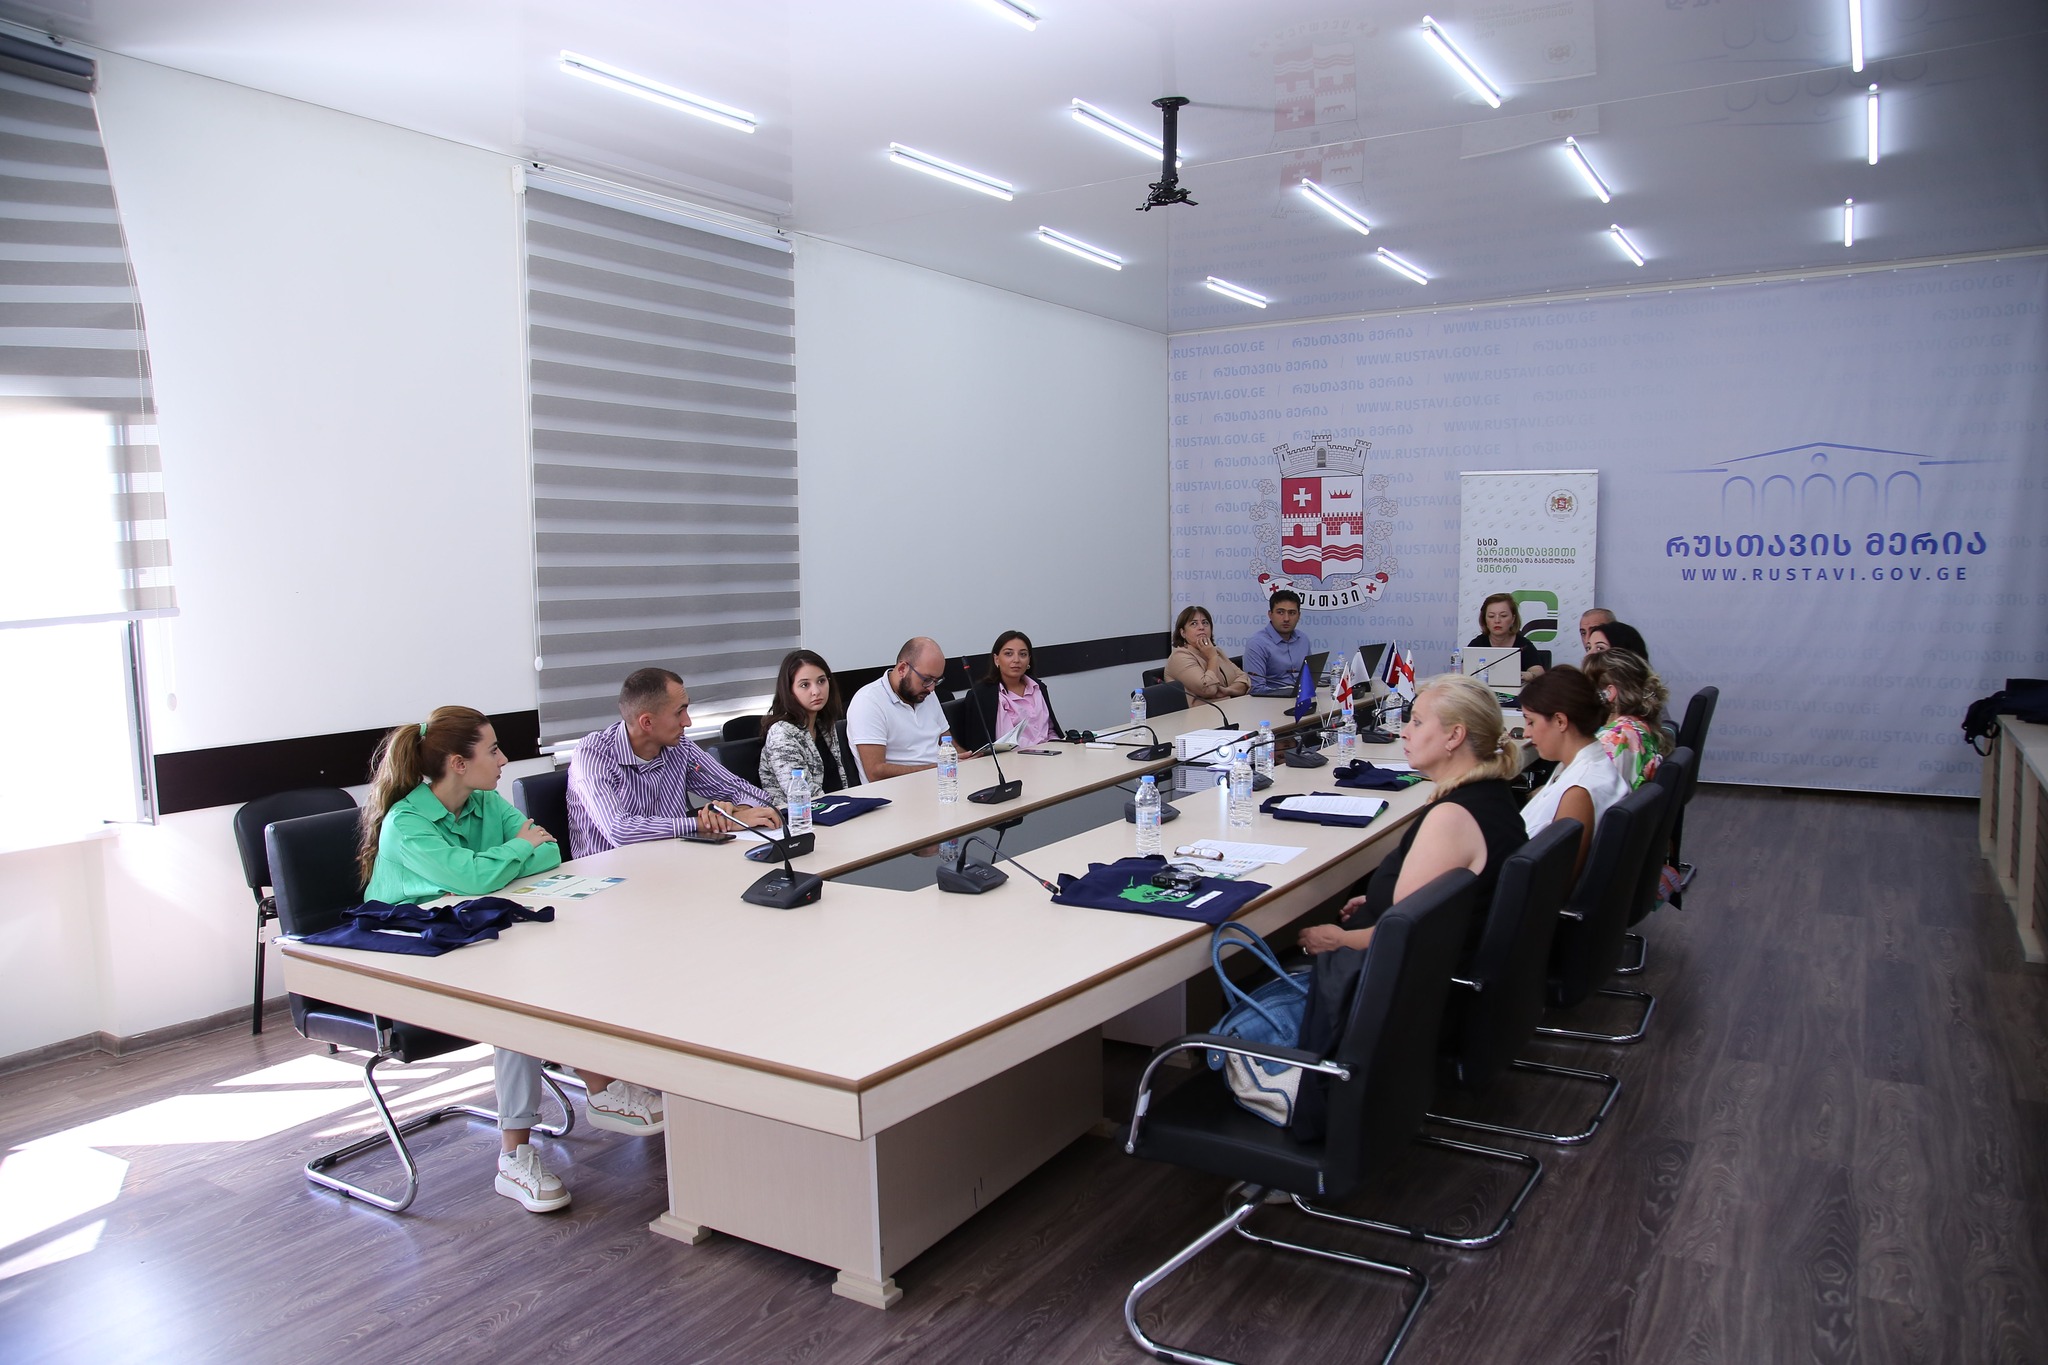 A training  on ambient air quality was held in Rustavi